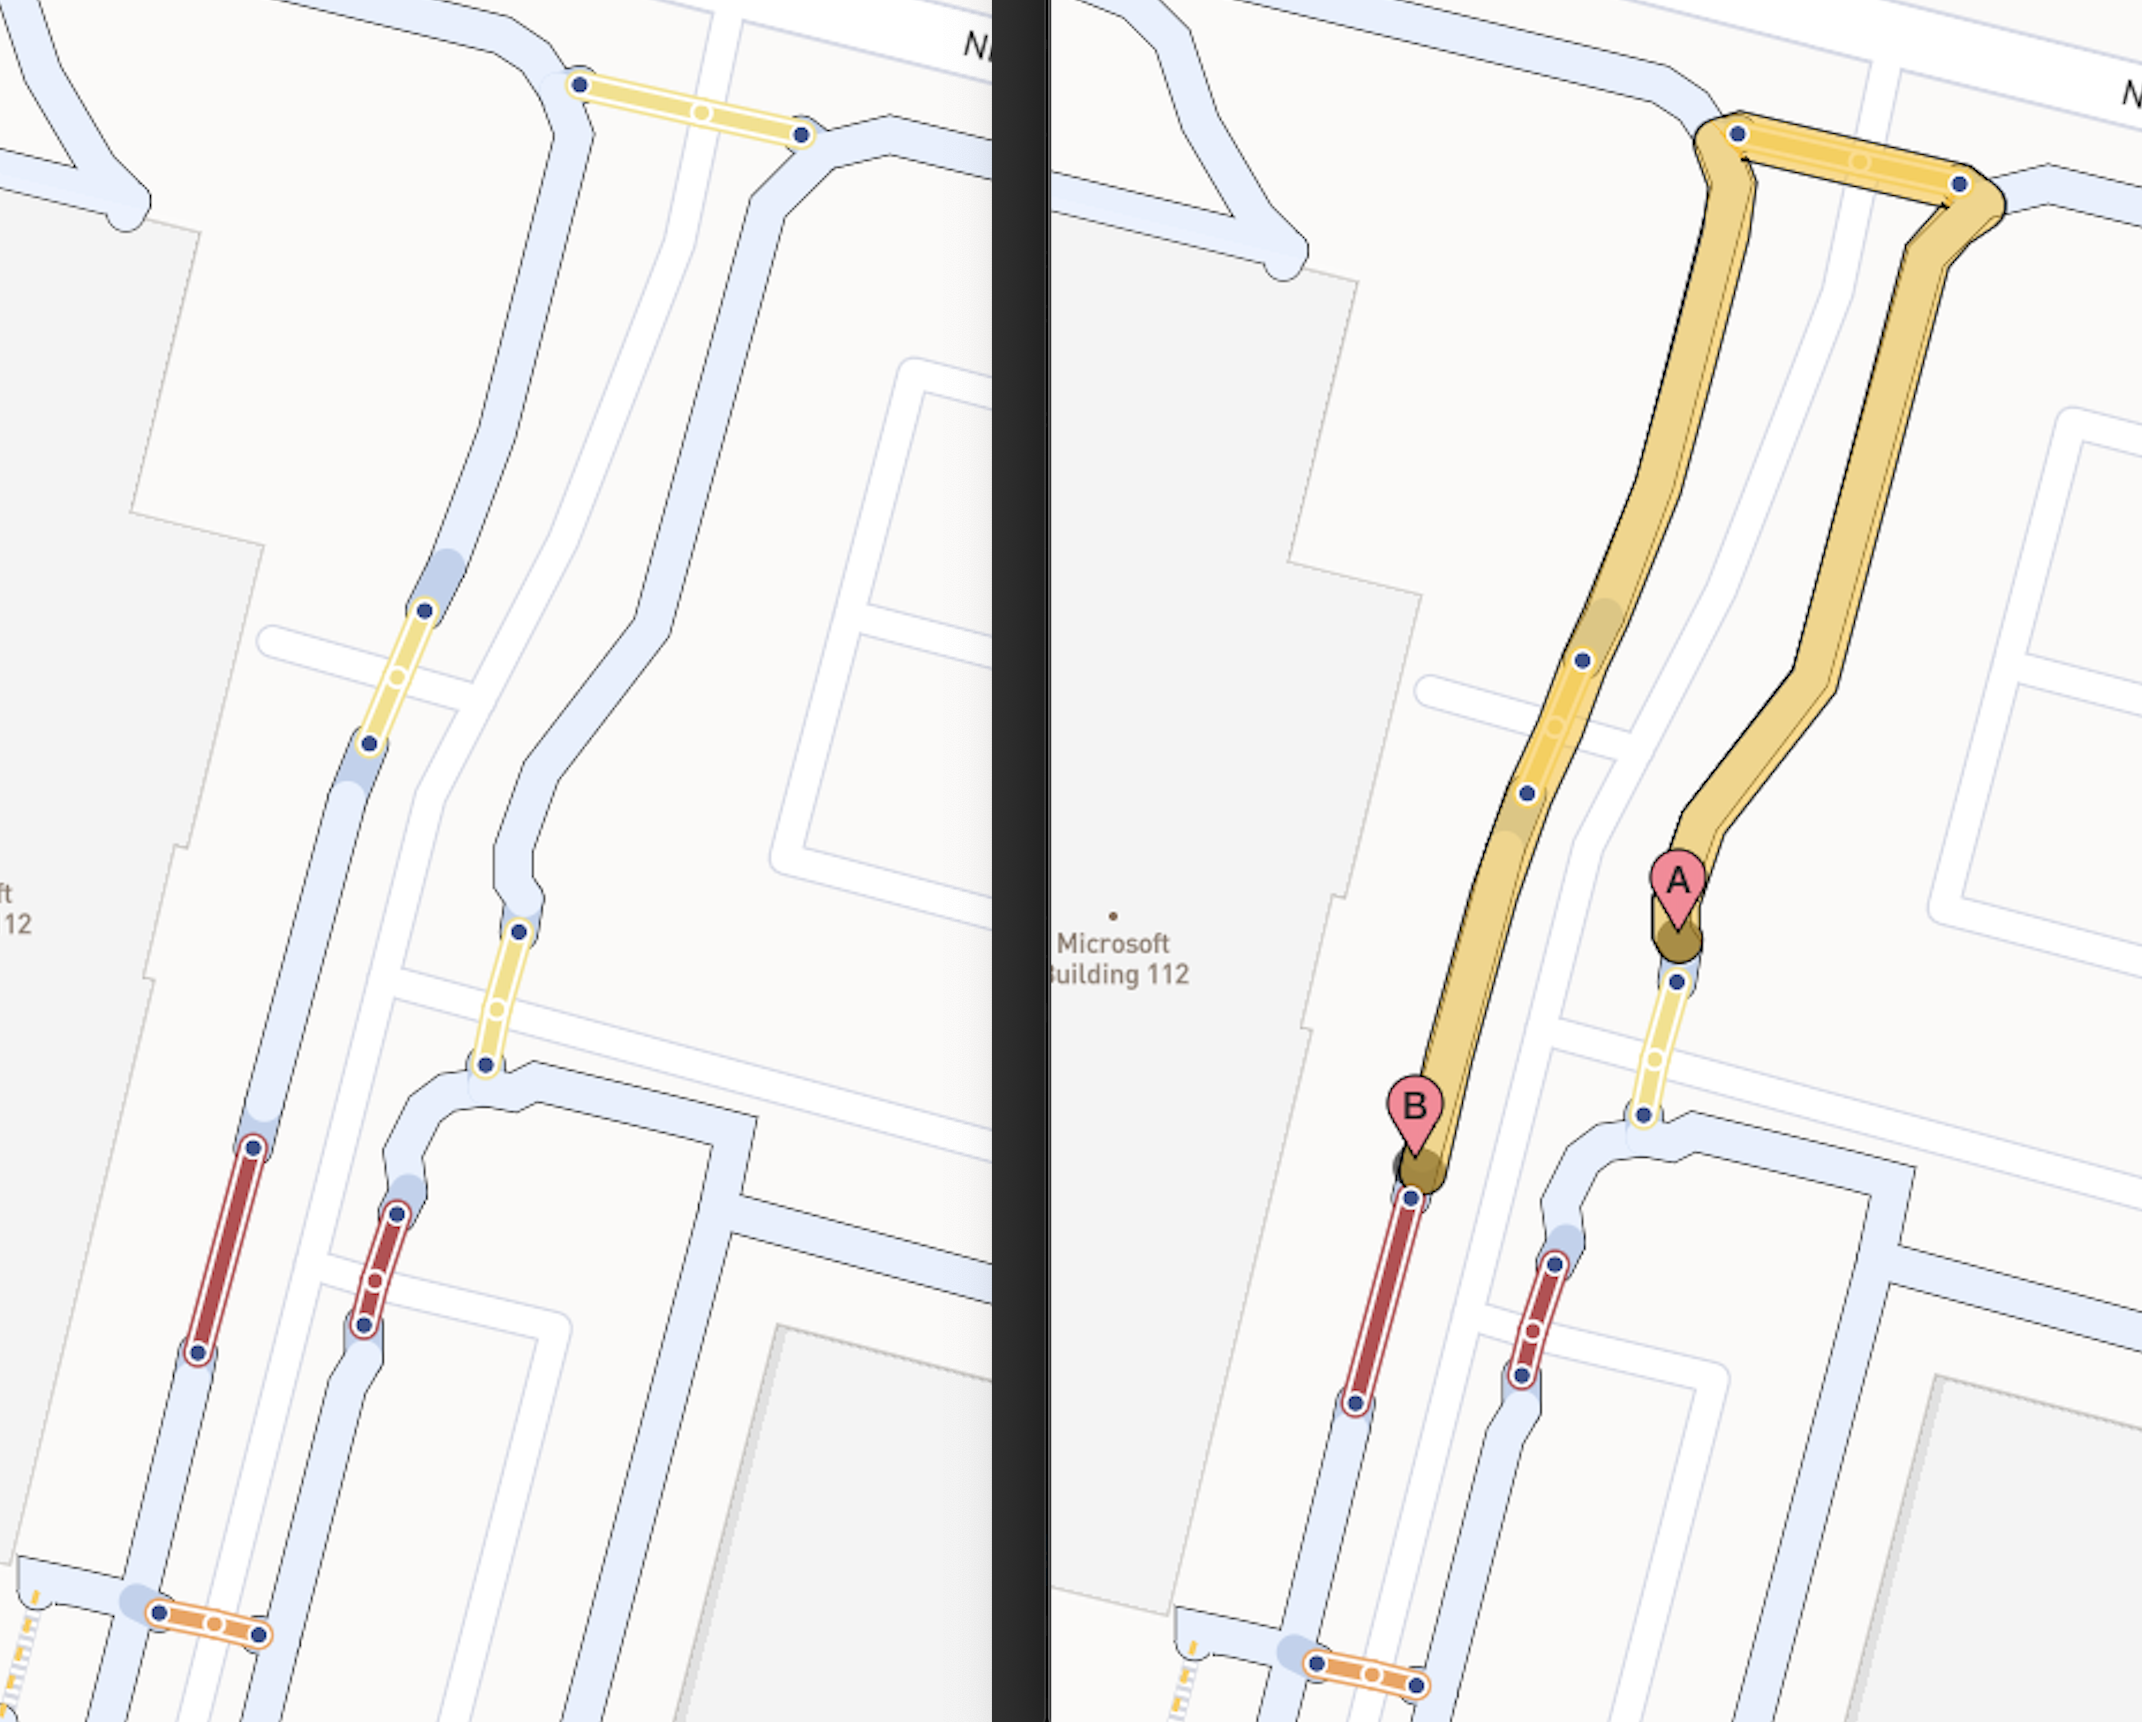 A screenshot of a route in AccessMap that prioritizes safer crossings; the route on the right uses crossings with stop signs as opposed to yield signs or no traffic control.